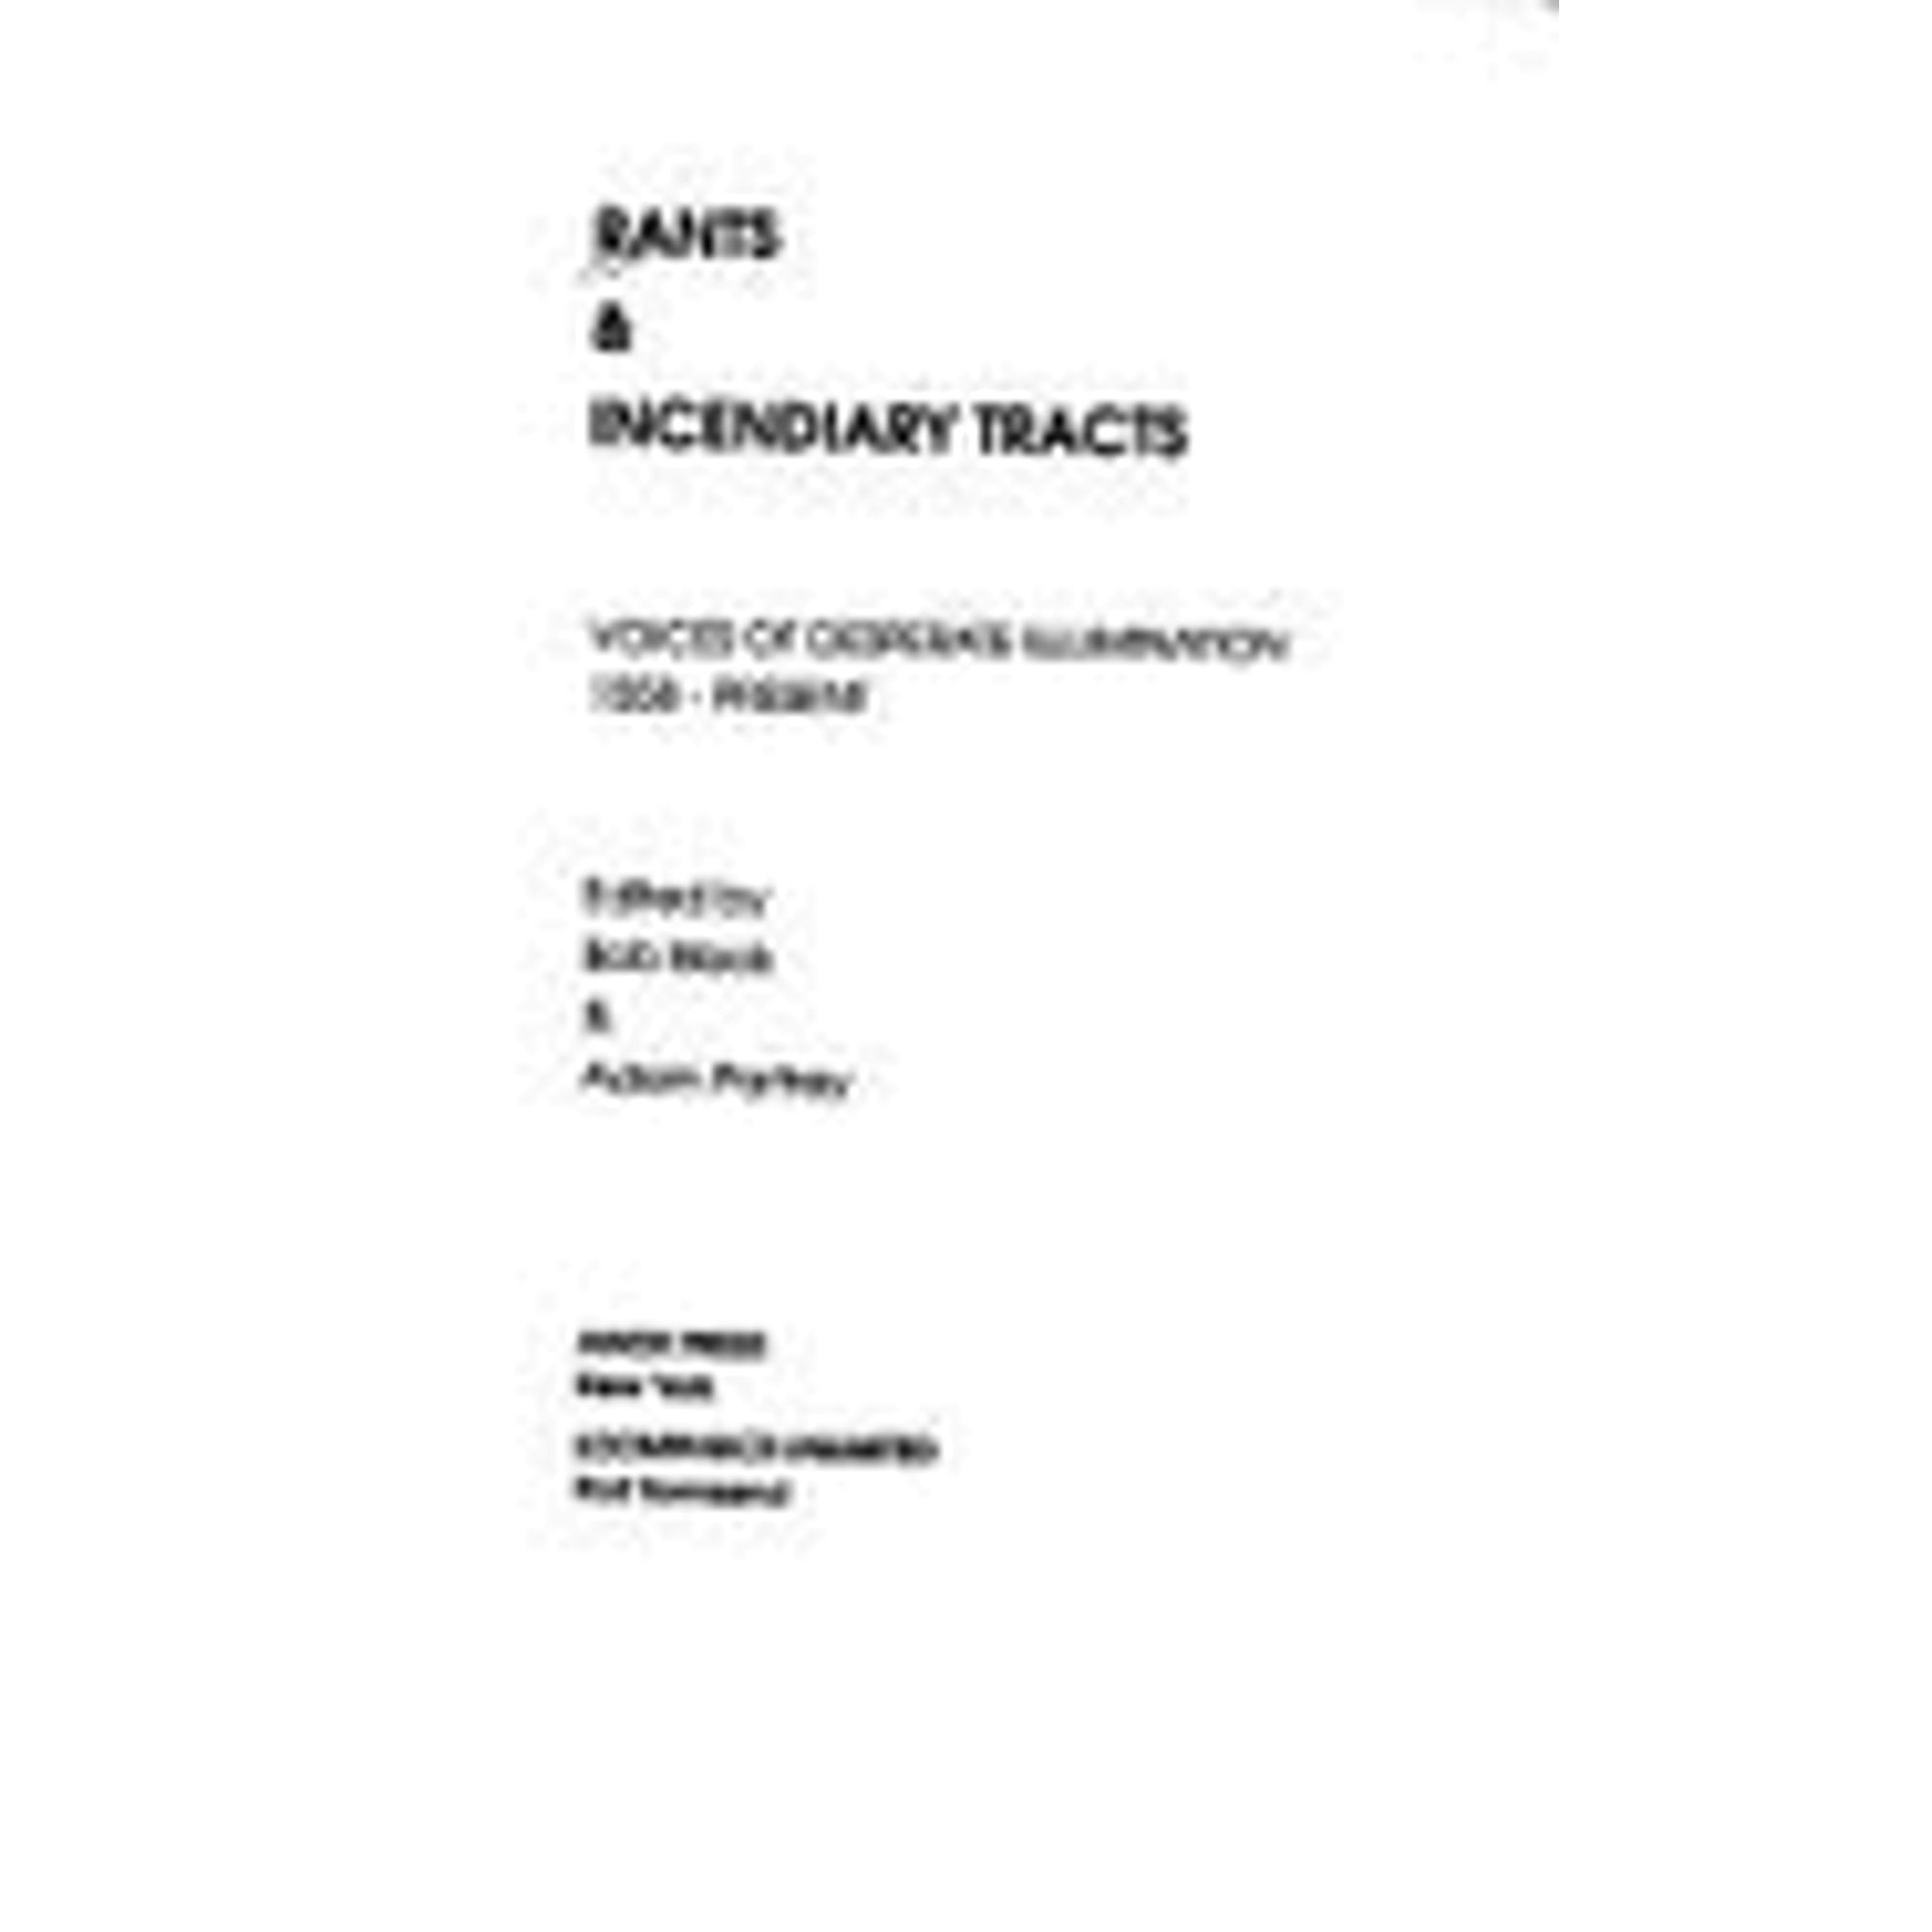 Pre-Owned Rants and Incendiary Tracts (Paperback 9780941693035) by Bob Black, Adam Parfrey